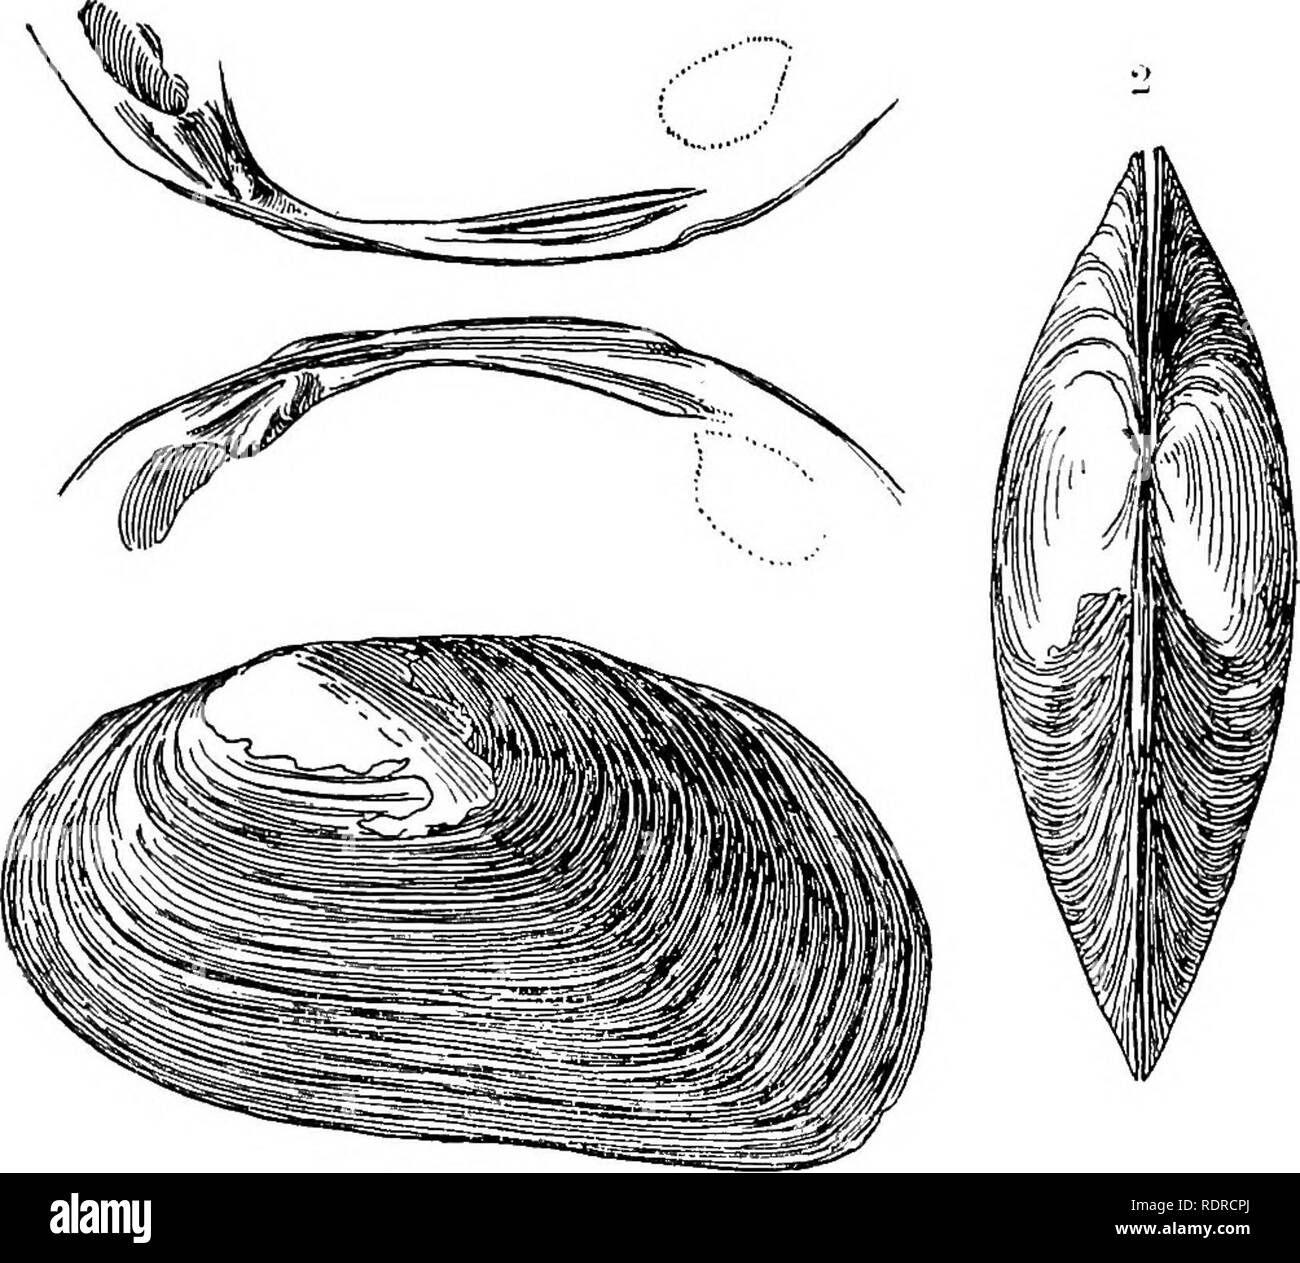 . Mollusca ... Mollusks. 144 VSIOlflDJE. scars somewhat deeply excavated, especially above; posterior scars ovate, lightly impressed; interior of shell nacreous shading from 3-i. i'ig. 8.—1 &amp; 2. Noduktria (N.) theobaldi, Preston (type), nat. size. 3. Hinge and muscular soars of same. pale flesh-colour to bluish iridescent, especially towards the posterior margins. Long. 34, lat. 60, diam. 19 mm. ffab. Manipur. The type is in the Indian Museum. 279. Nodularia (Nodularia) olivaria (Lea). Nodularia (Nodularia) olivaria (Lea) Simpson, Washington, D.O., Smiths. Inst., Nat. Mus. Proc. xxii, 1900 Stock Photo